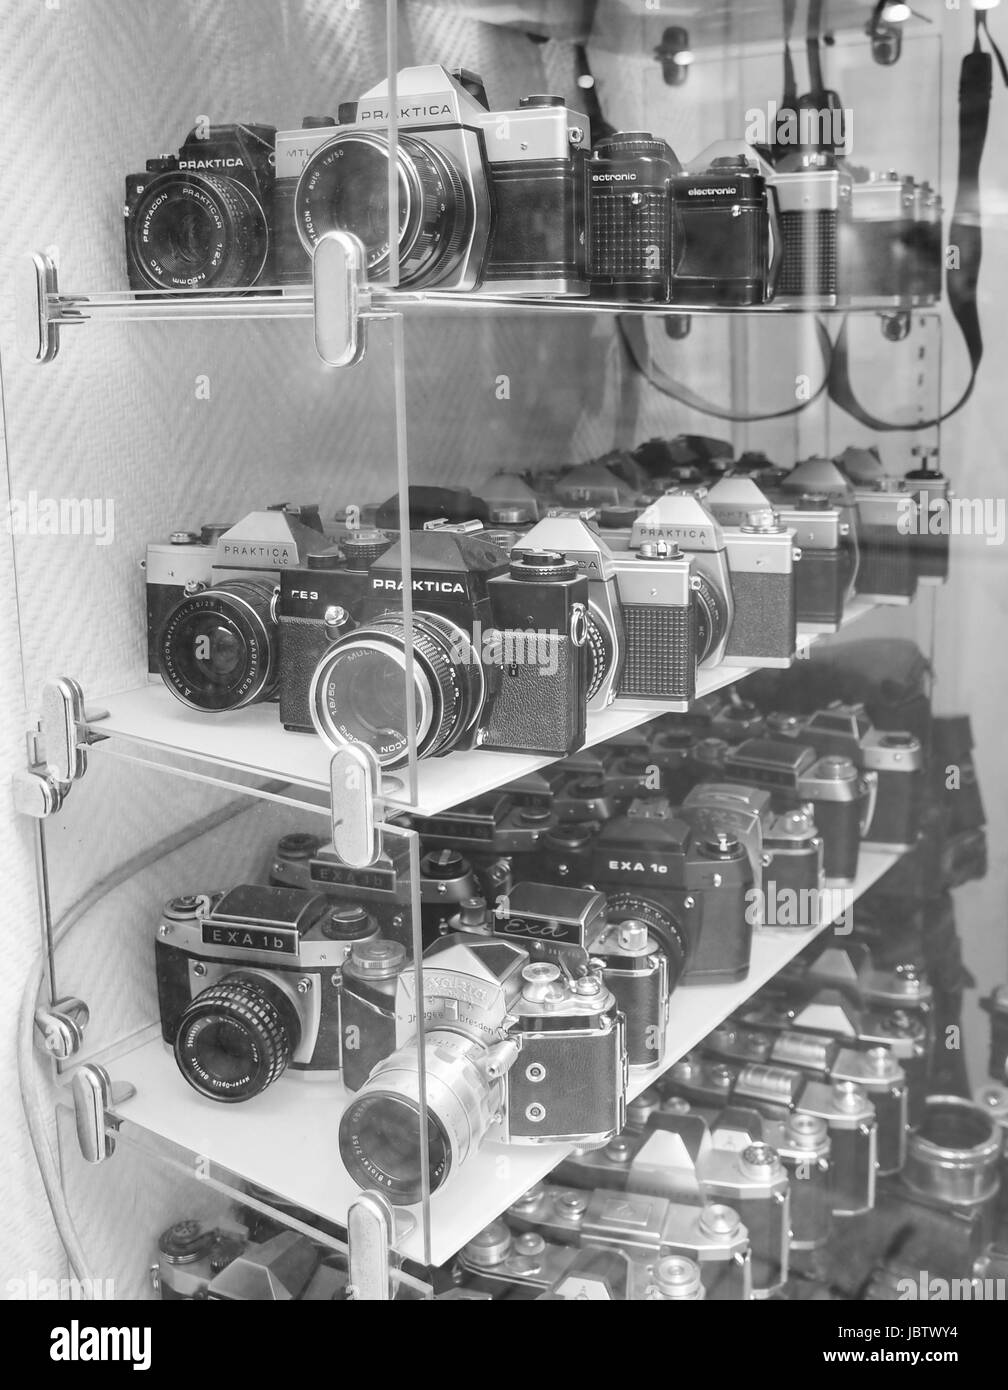 DRESDEN, GERMANY - JUNE 14, 2014: Many vintage models of Praktica and Exa SLR cameras built in the DDR German Democratic Republic in early to mid XX century Stock Photo